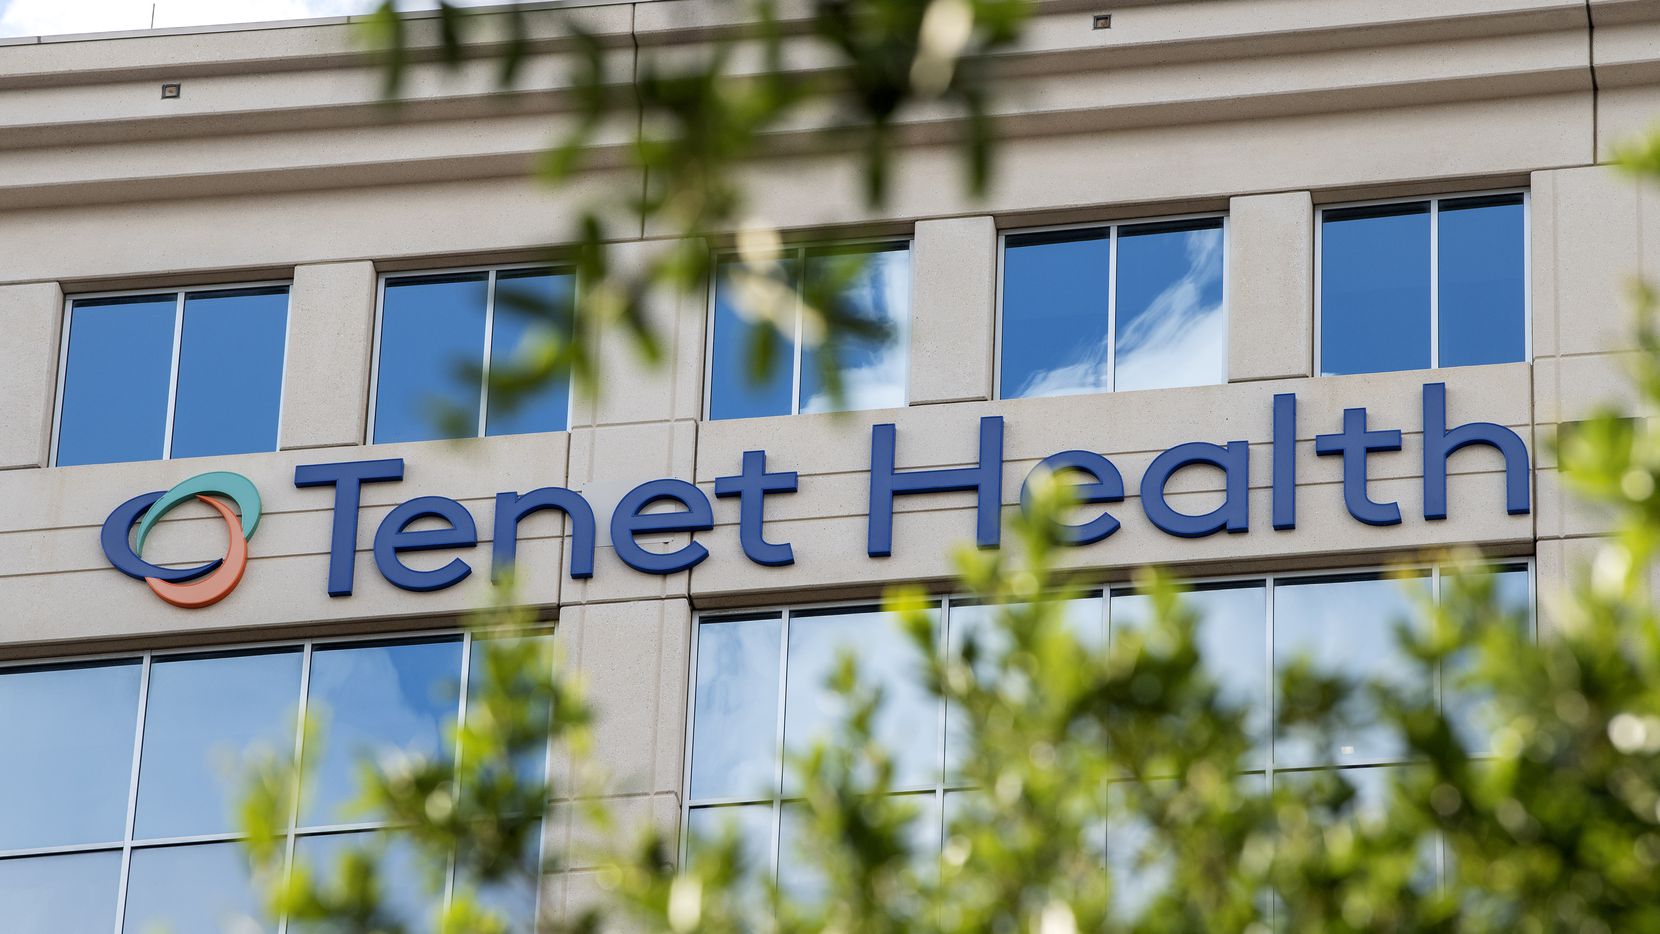 Tenet Healthcare, which has 65 hospitals nationwide, has seen a recovery in business over...